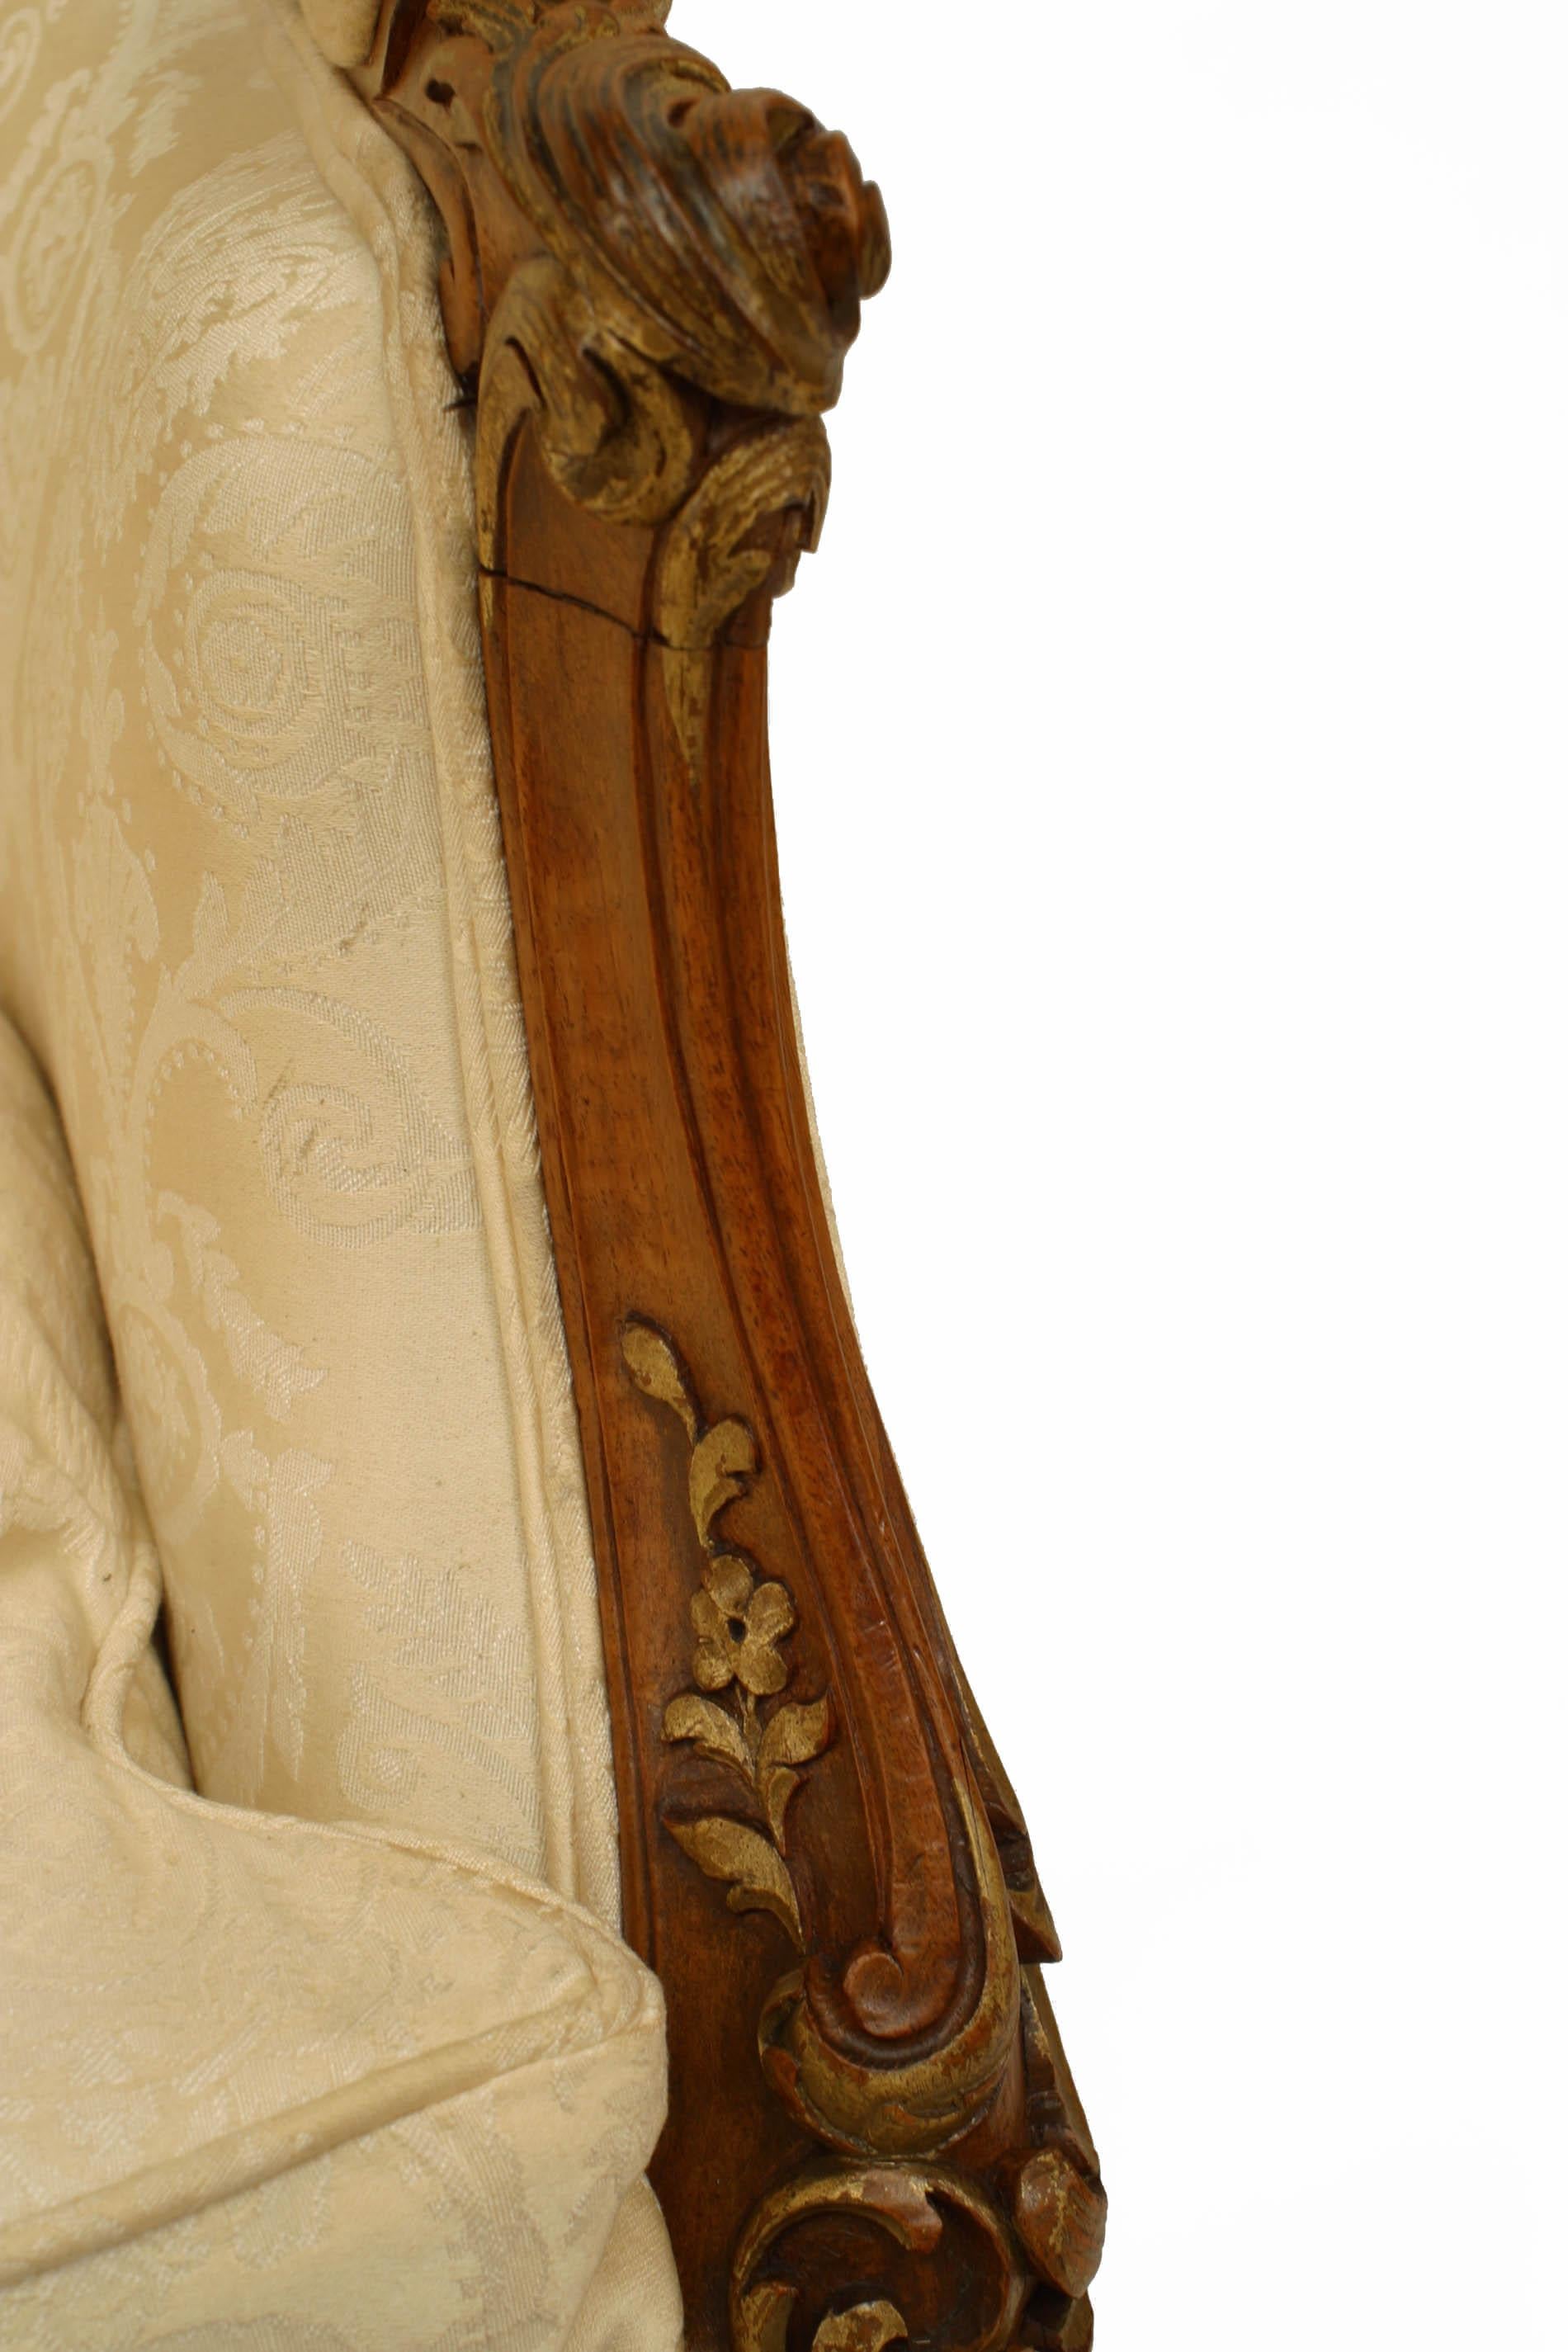 louis xv furniture for sale